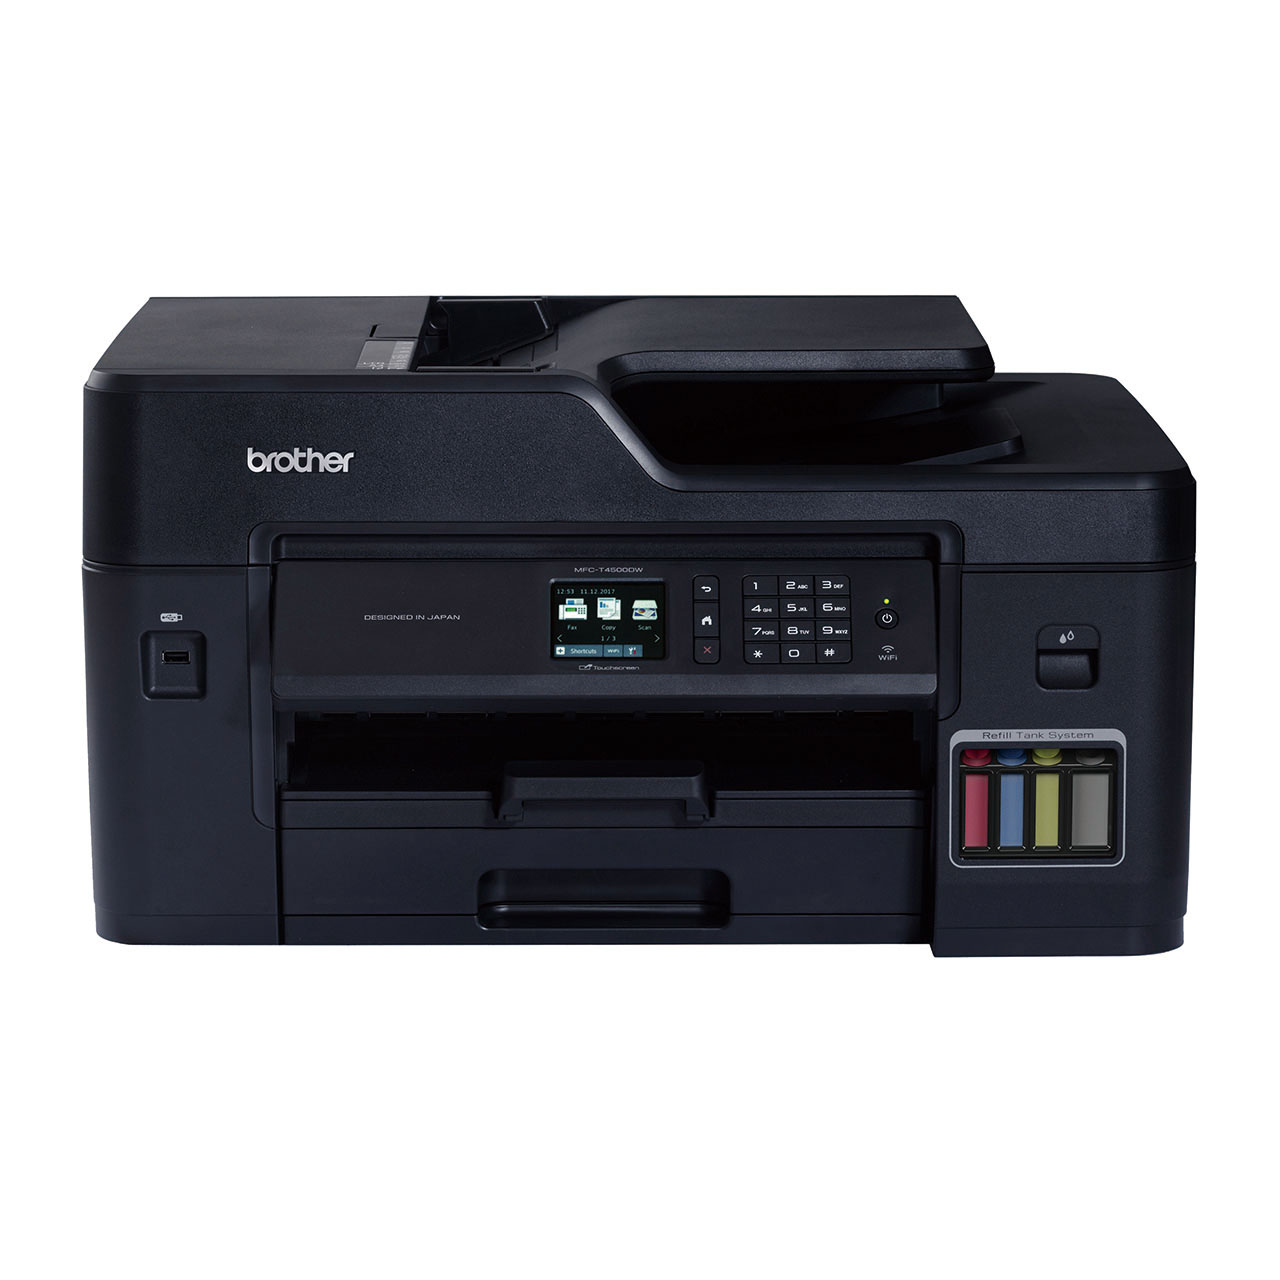 Brother MFC-T4500DW All-in-One Inktank Refill System Printer with Wi-Fi and Auto Duplex Printing